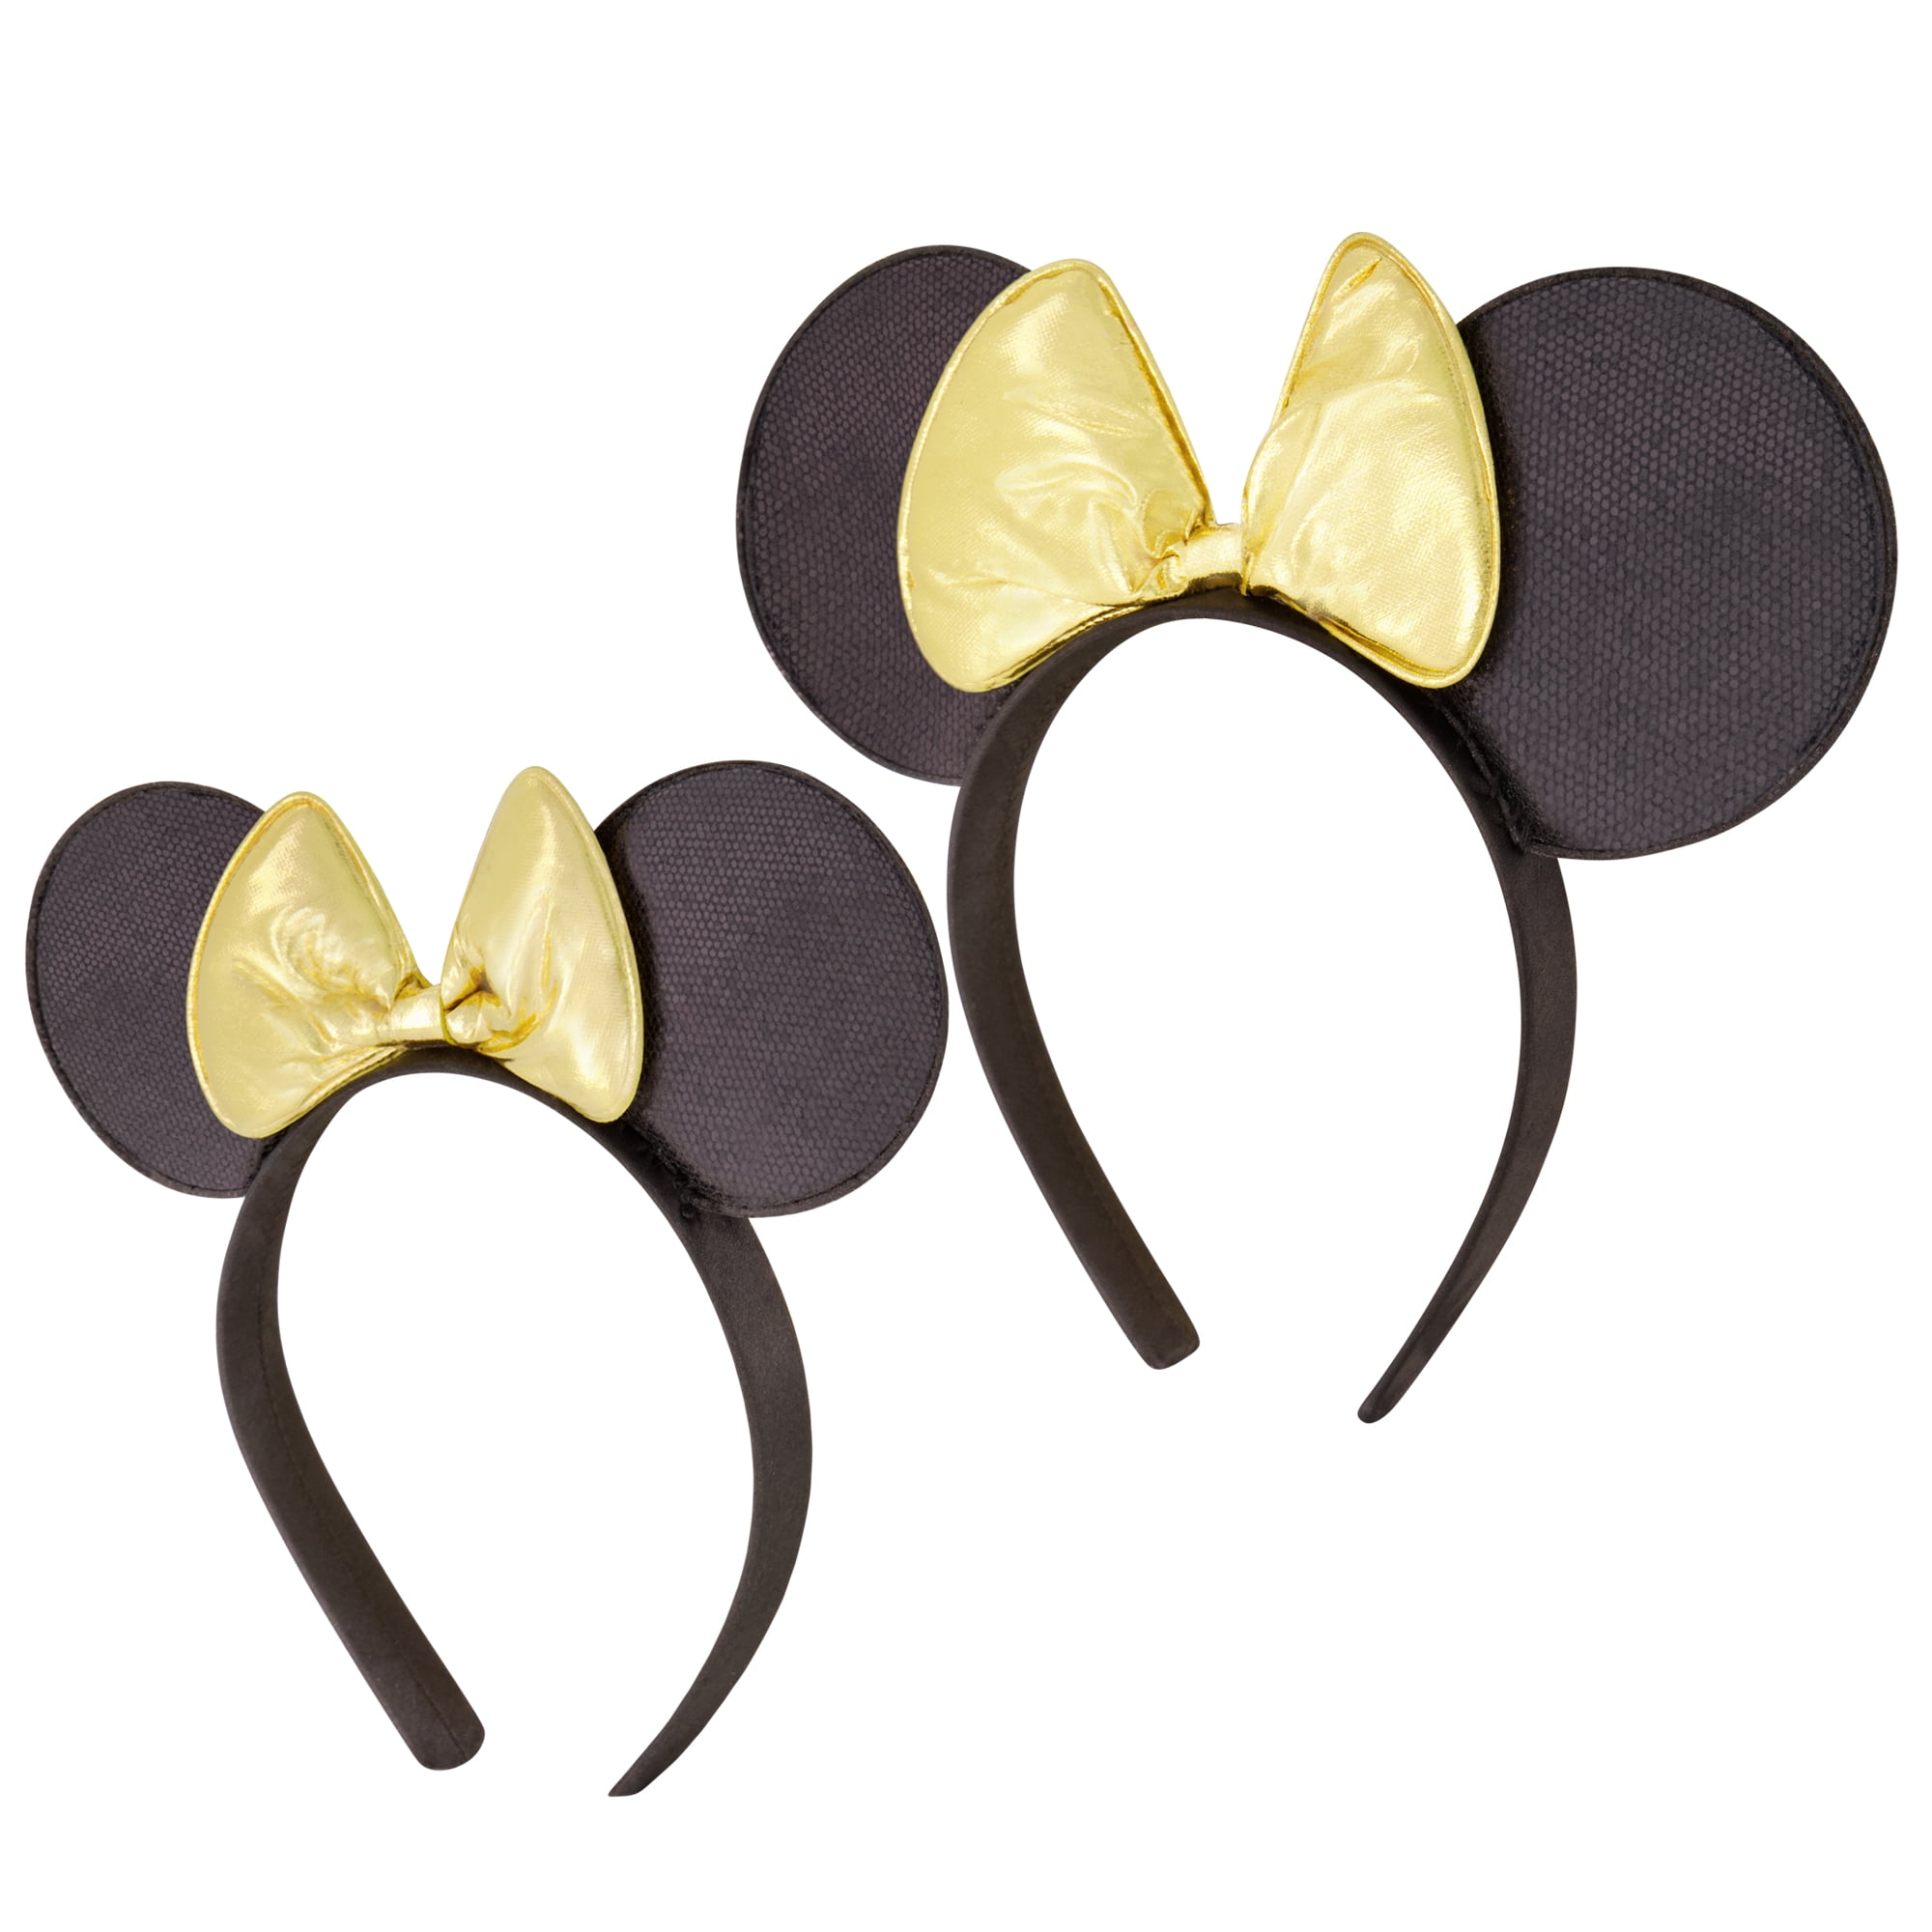 Minnie Mickey Mouse Ears Headbands 12 pcs Black Red Bow Party Favors Birthday Sh 